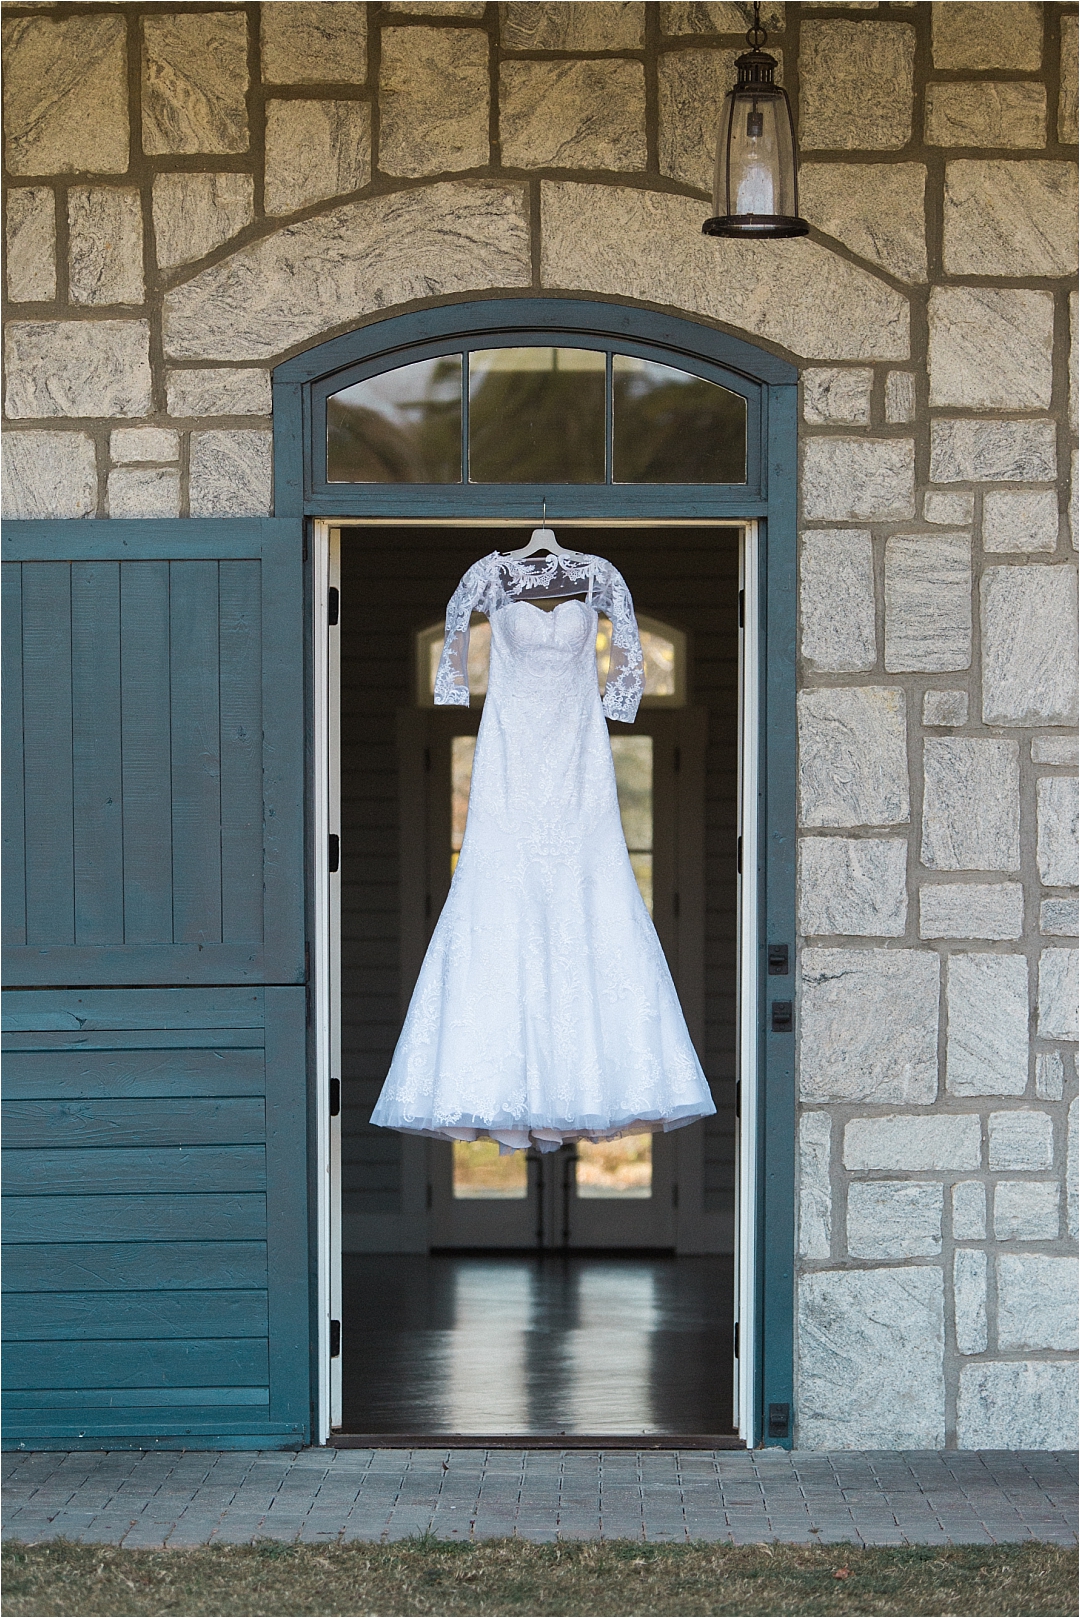 Lace wedding dress in doorway_Photos by Leigh Wolfe, Atlanta's Top Wedding Photographer